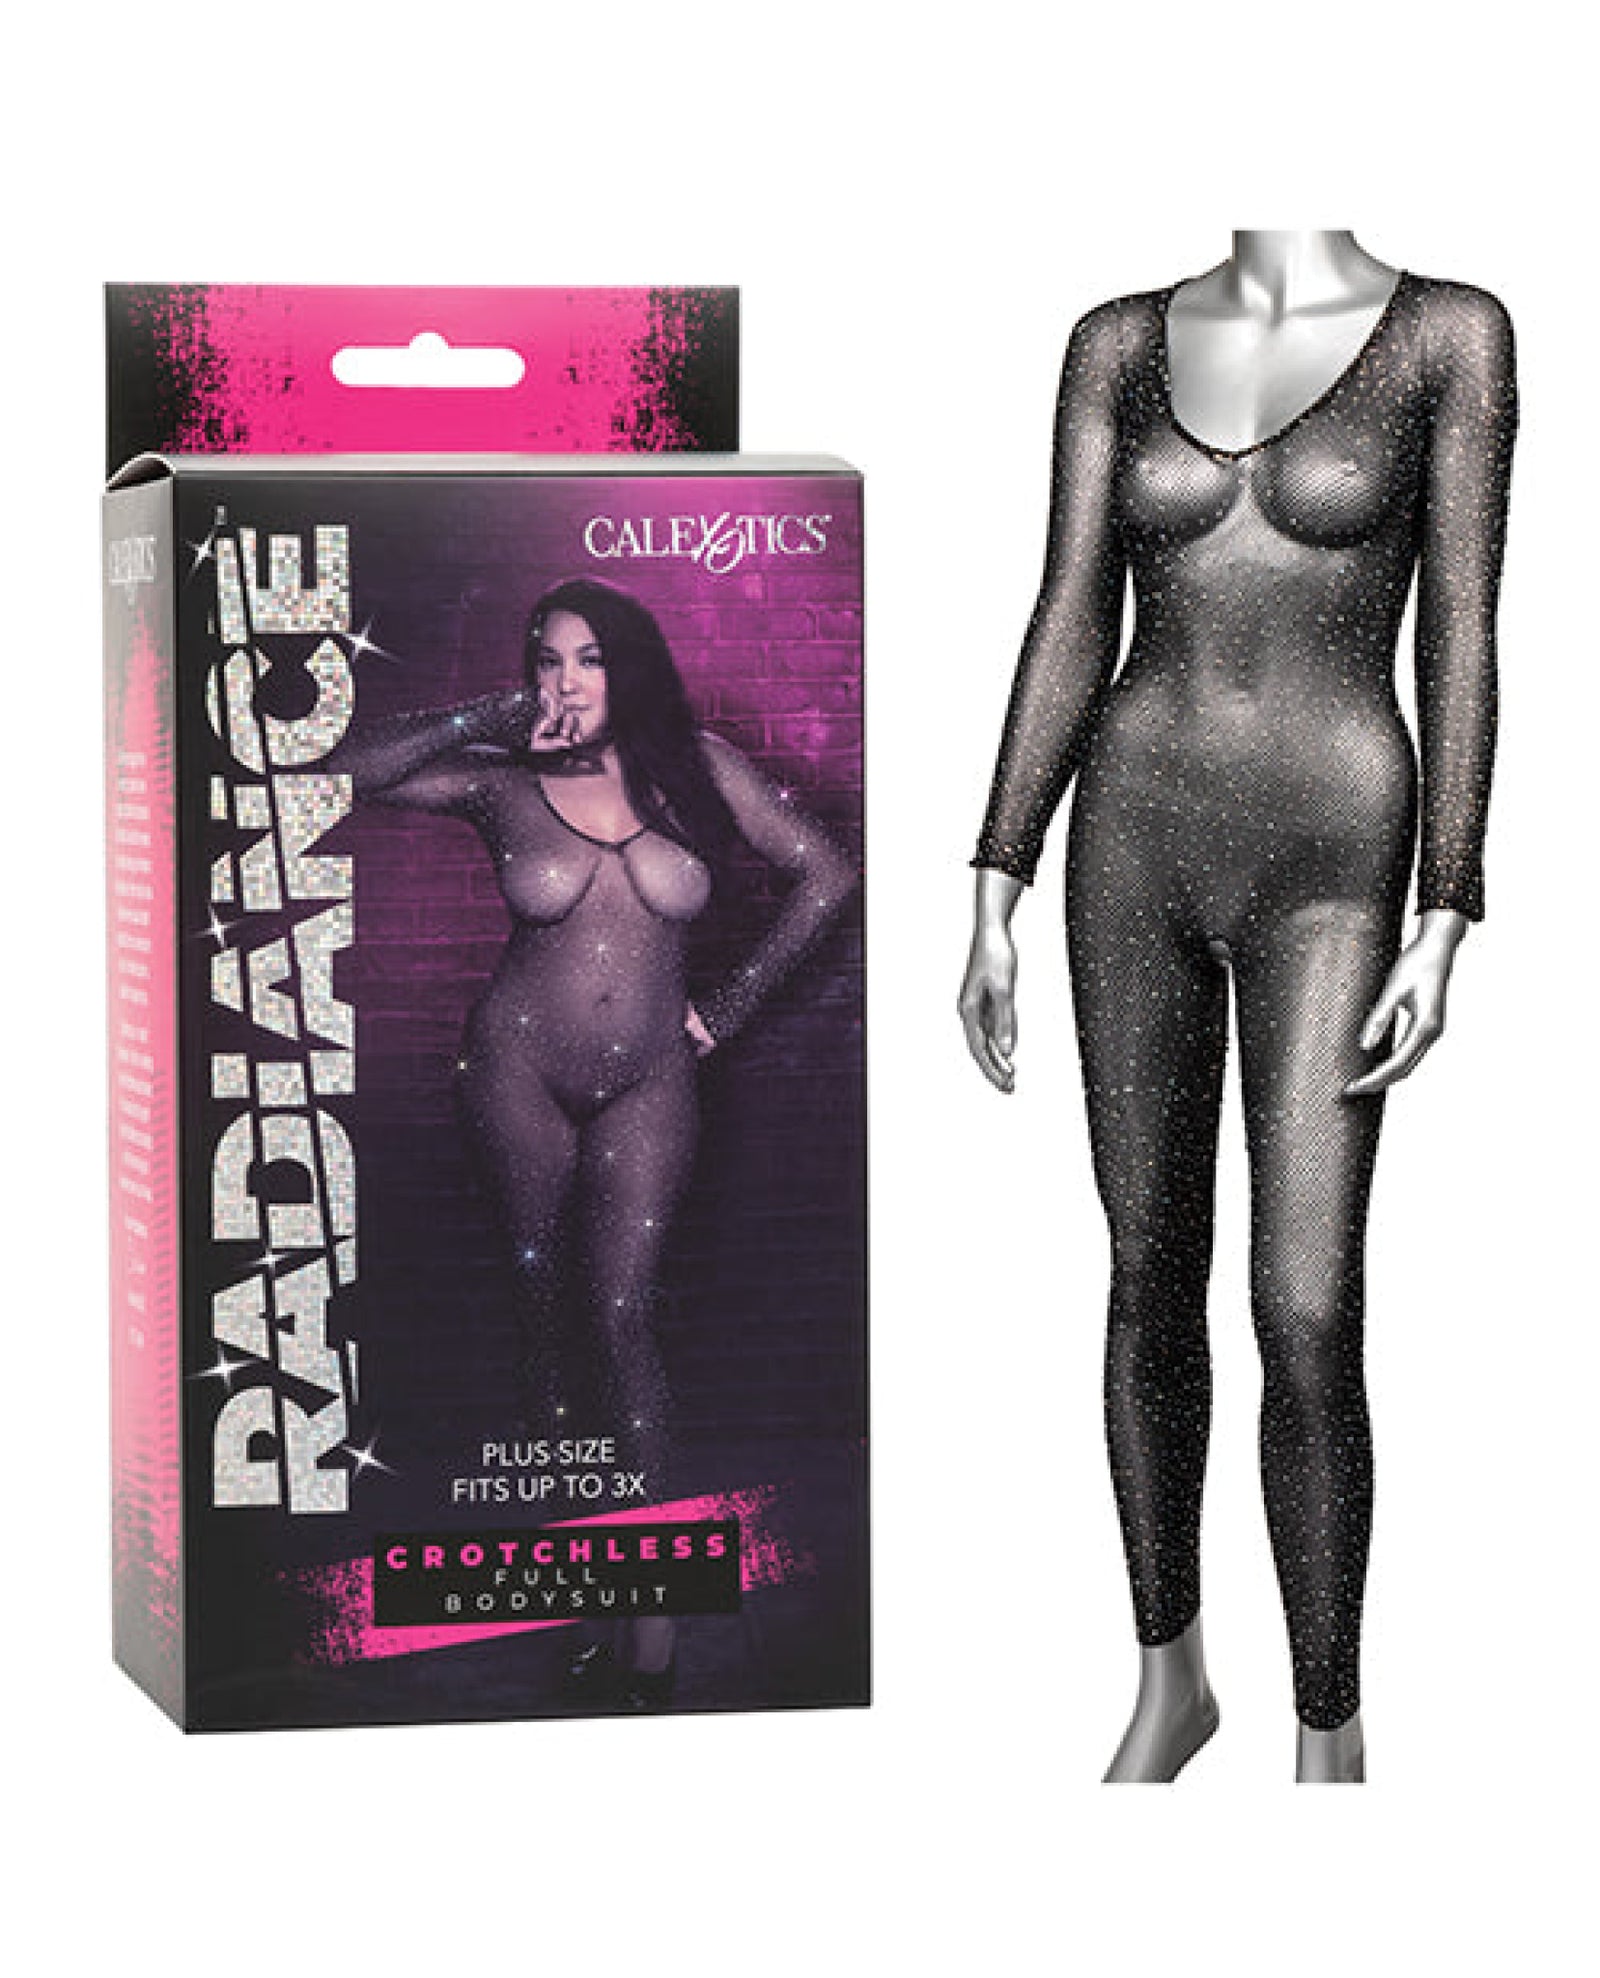 Radiance Crotchless Full Body Suit Black Qn California Exotic Novelties